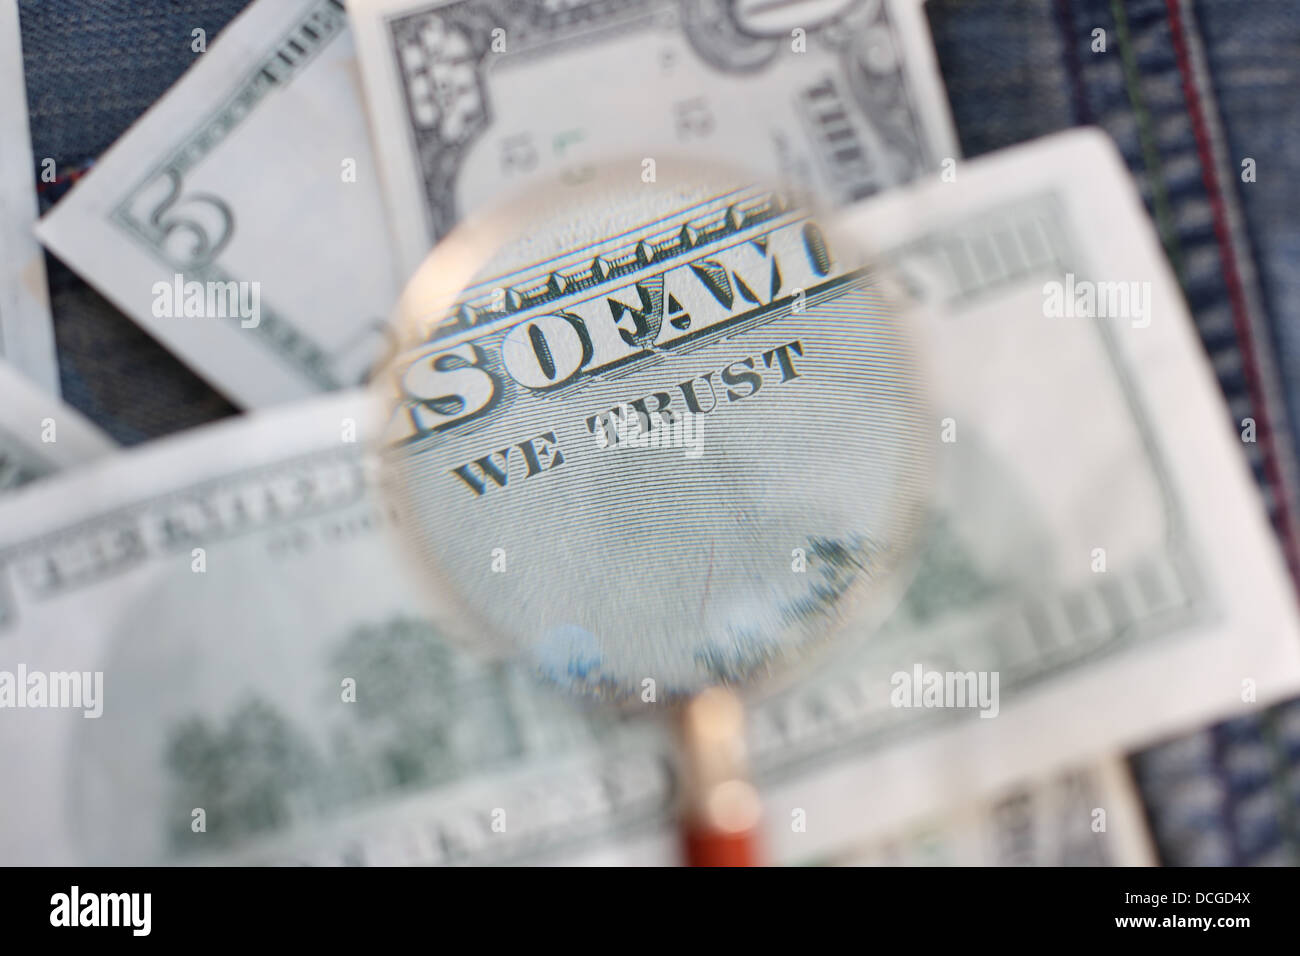 The back side of the banknote is under a magnifying glass Stock Photo